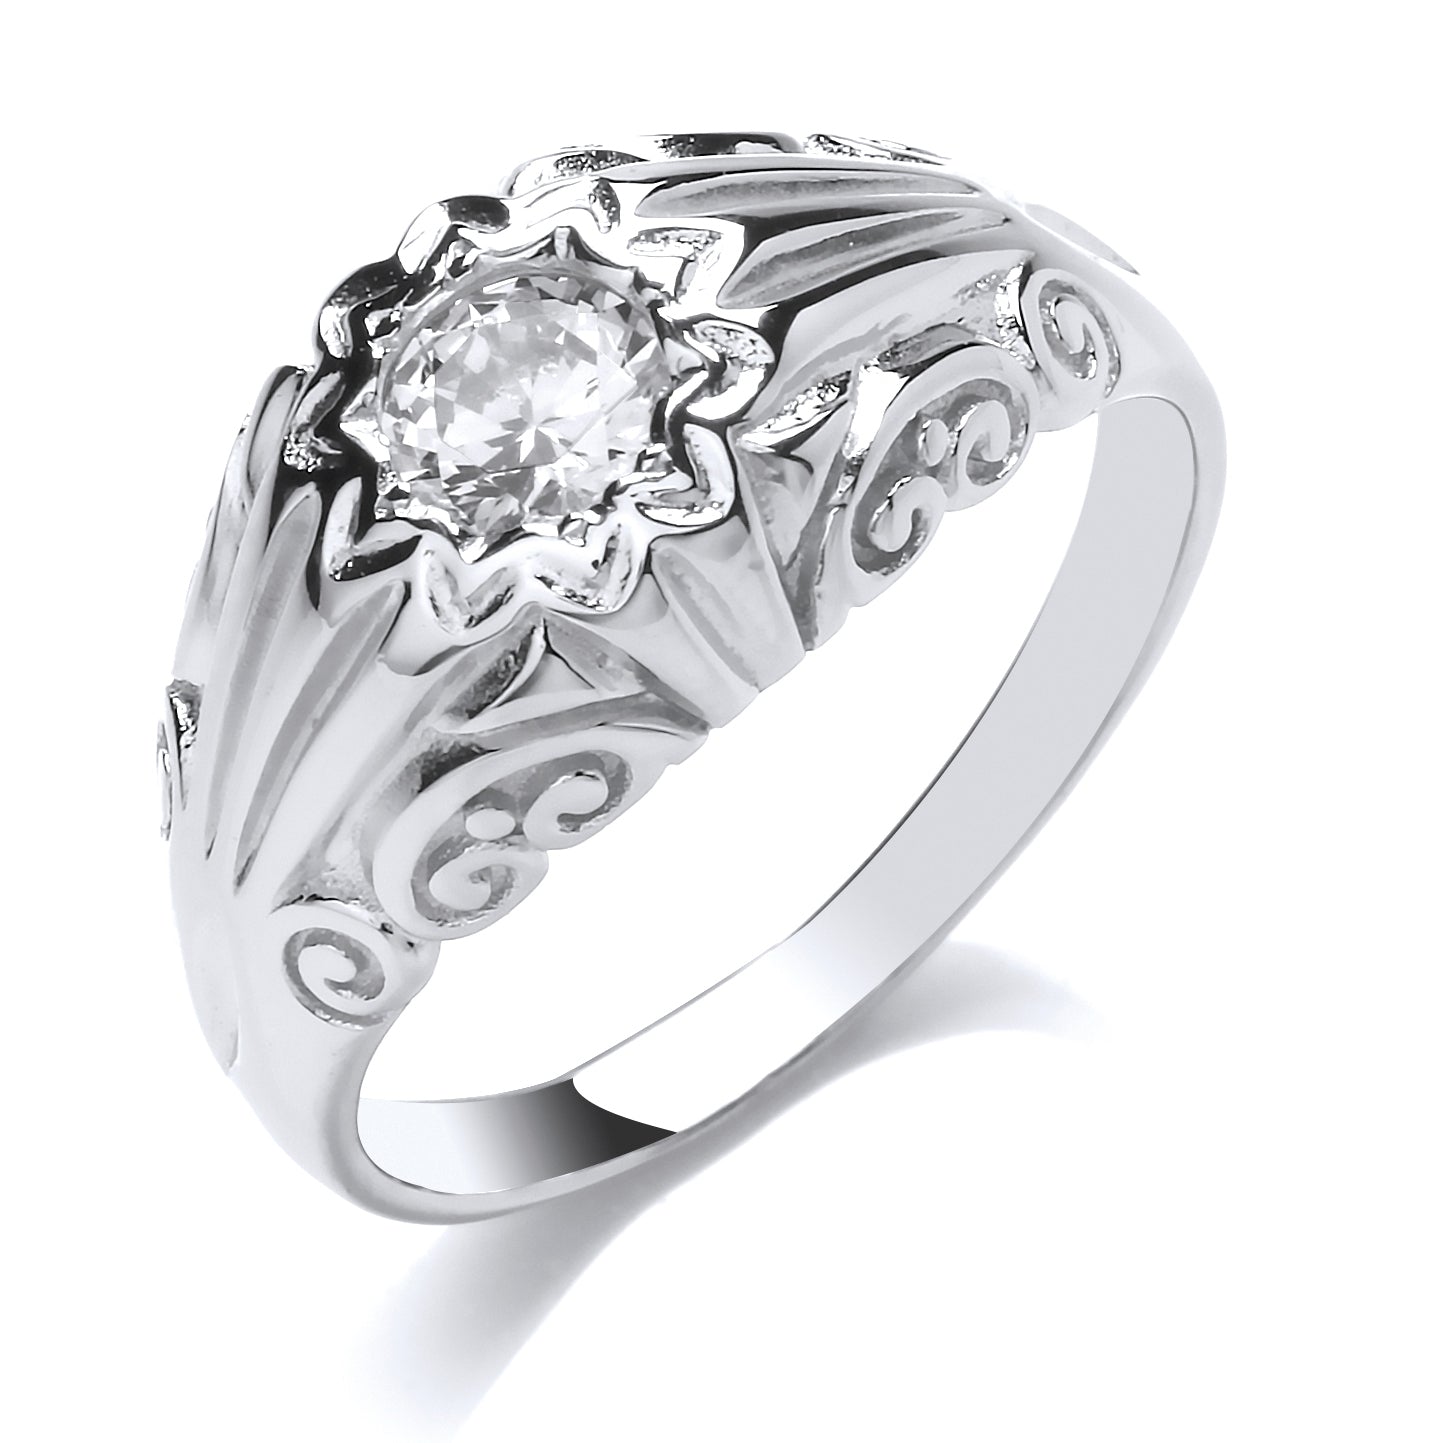 Mens Silver  CZ Gypsy Solitaire Signet Ring - GVR800